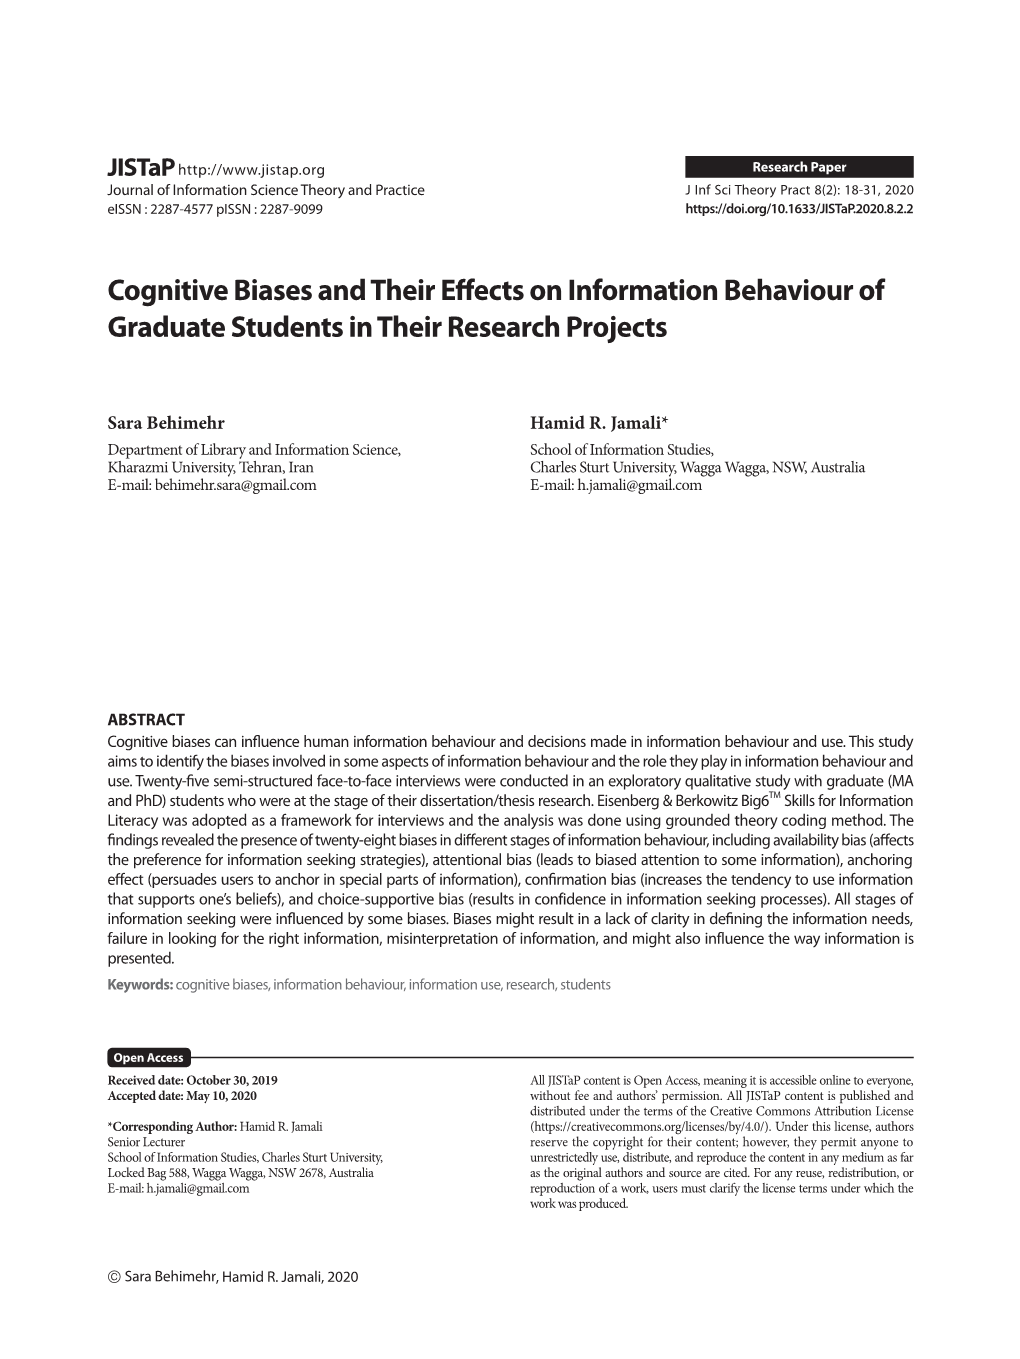 Cognitive Biases and Their Effects on Information Behaviour of Graduate Students in Their Research Projects